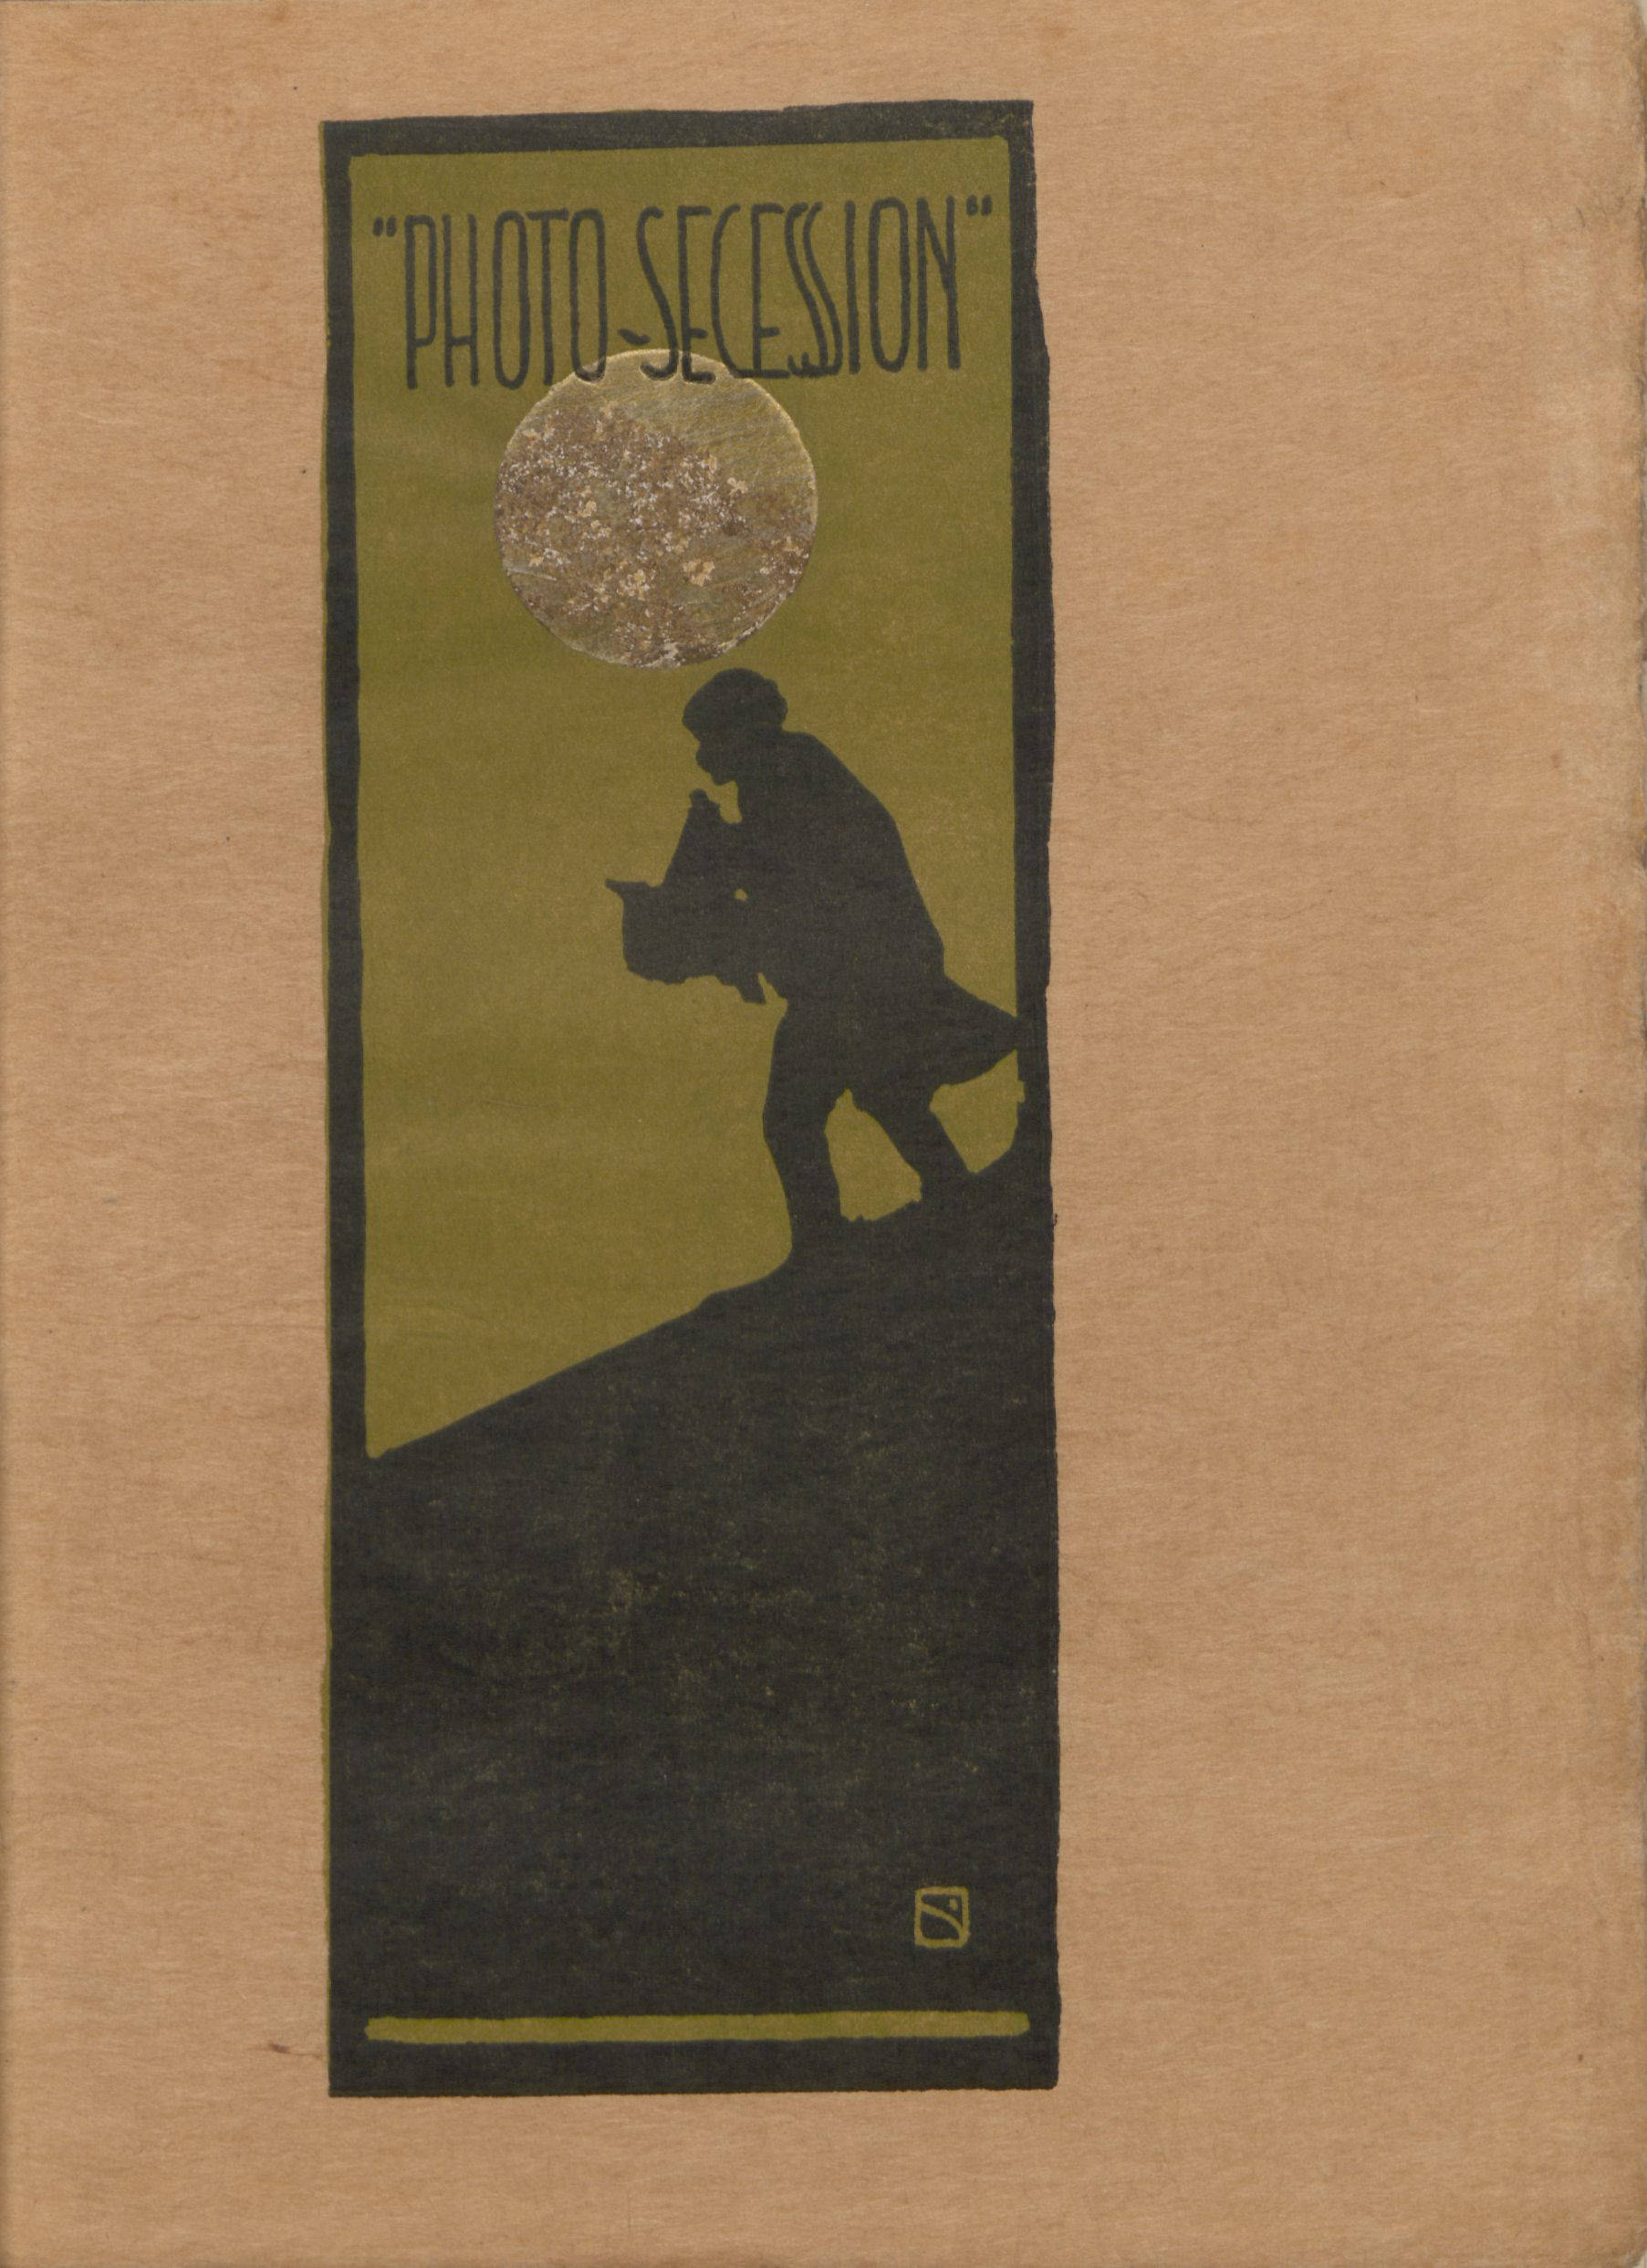 Cover of <em>The Photo-Secession</em> (1905), from the Thomas J. Watson Library